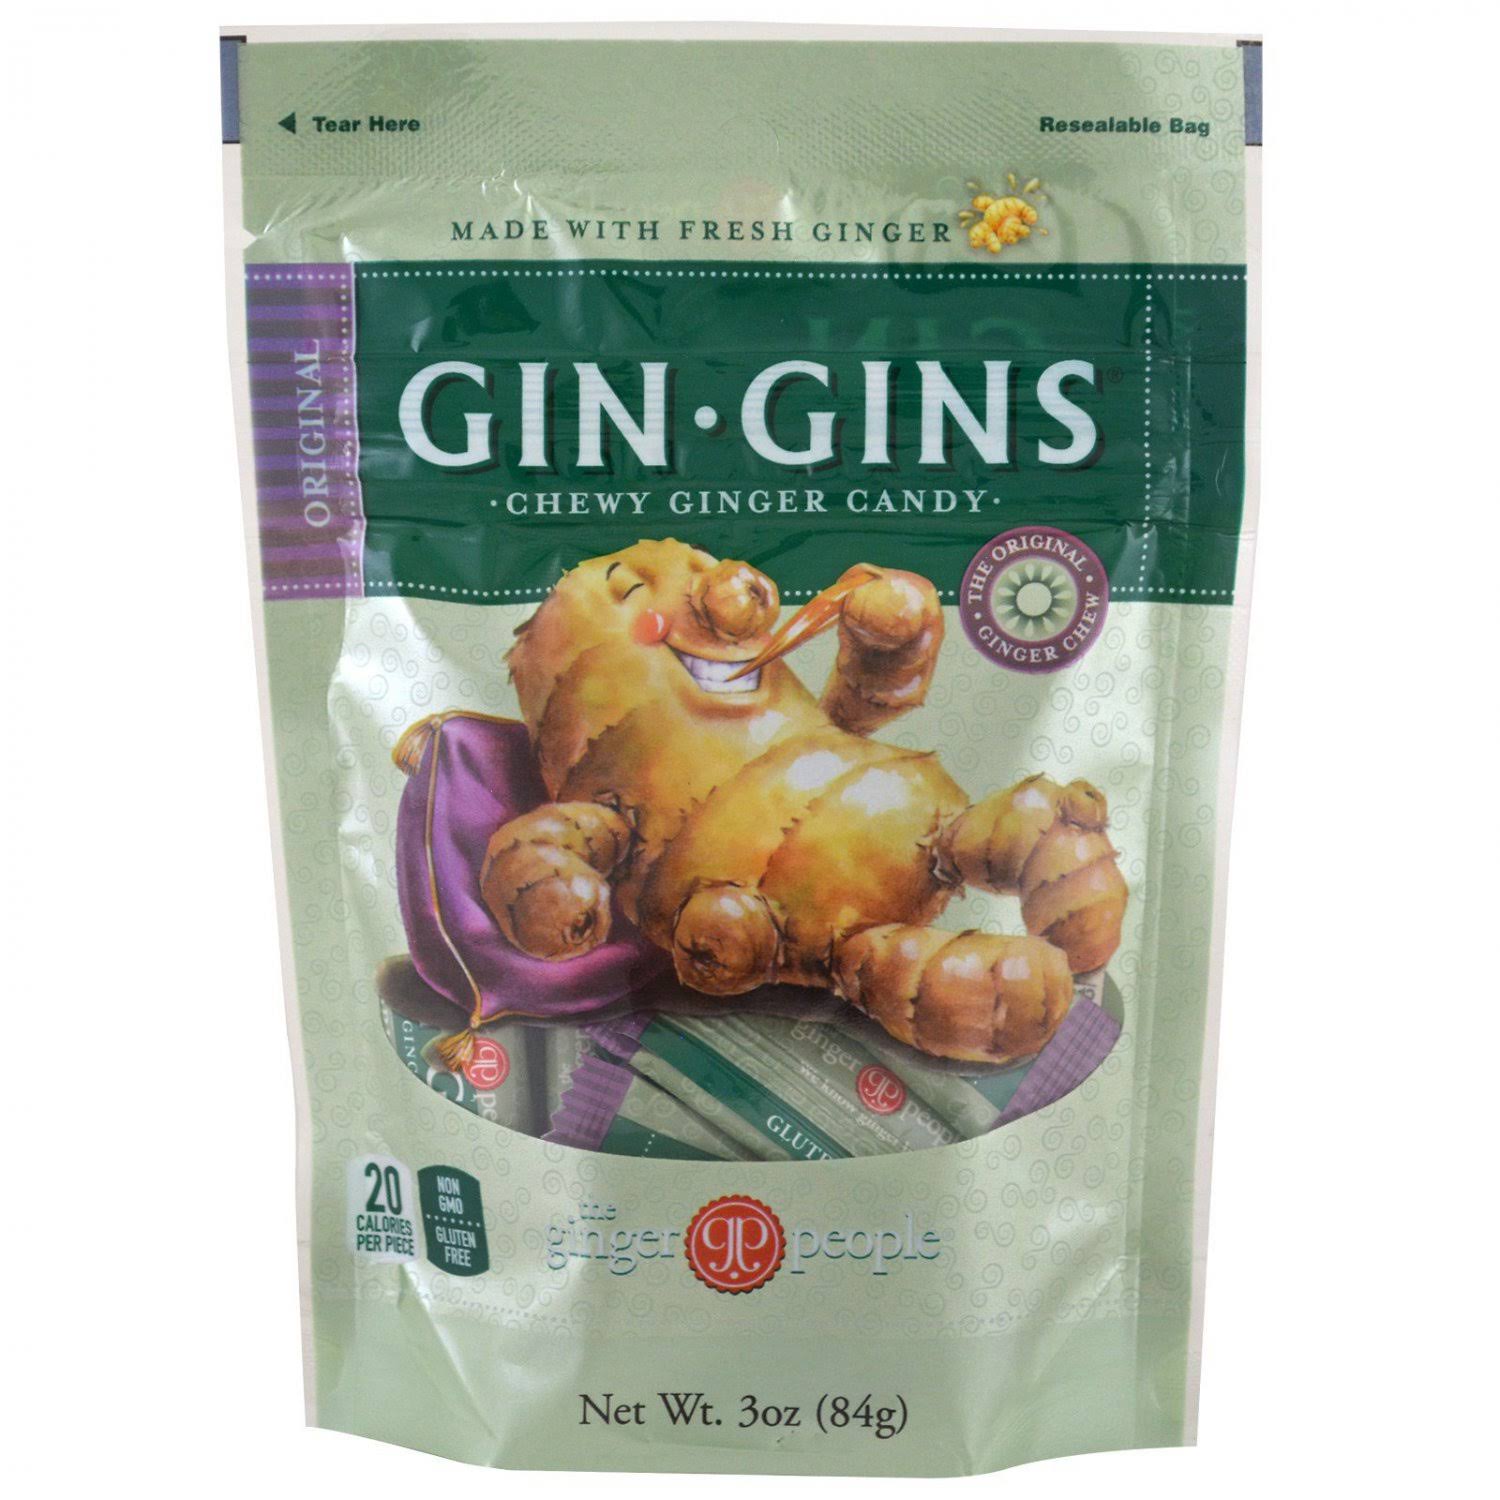 Gin Gins Chewy Ginger Candy - Original, 3.0oz